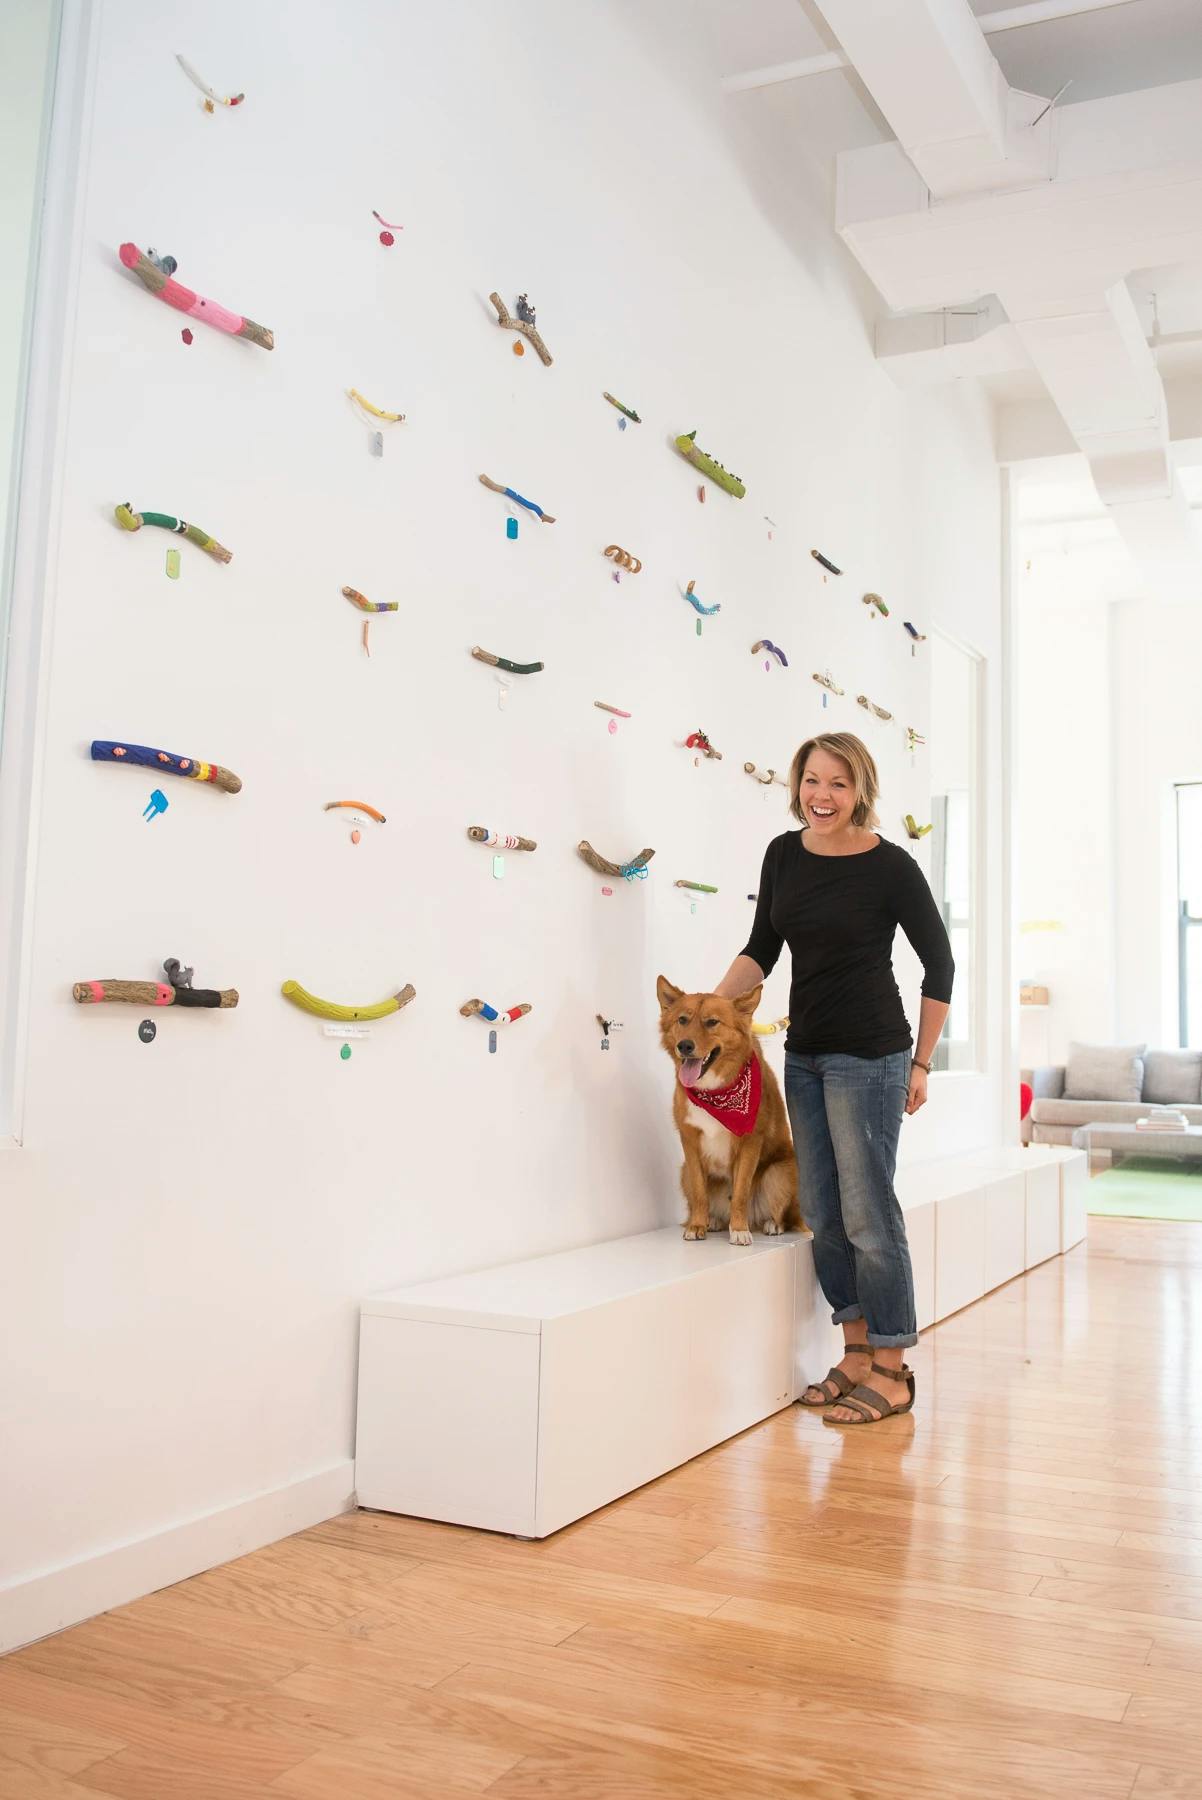 Artist Christina Watka standing next to a dog with a red bandana alongside a white wall with an installation of fourty-three colorful stick sculptures.